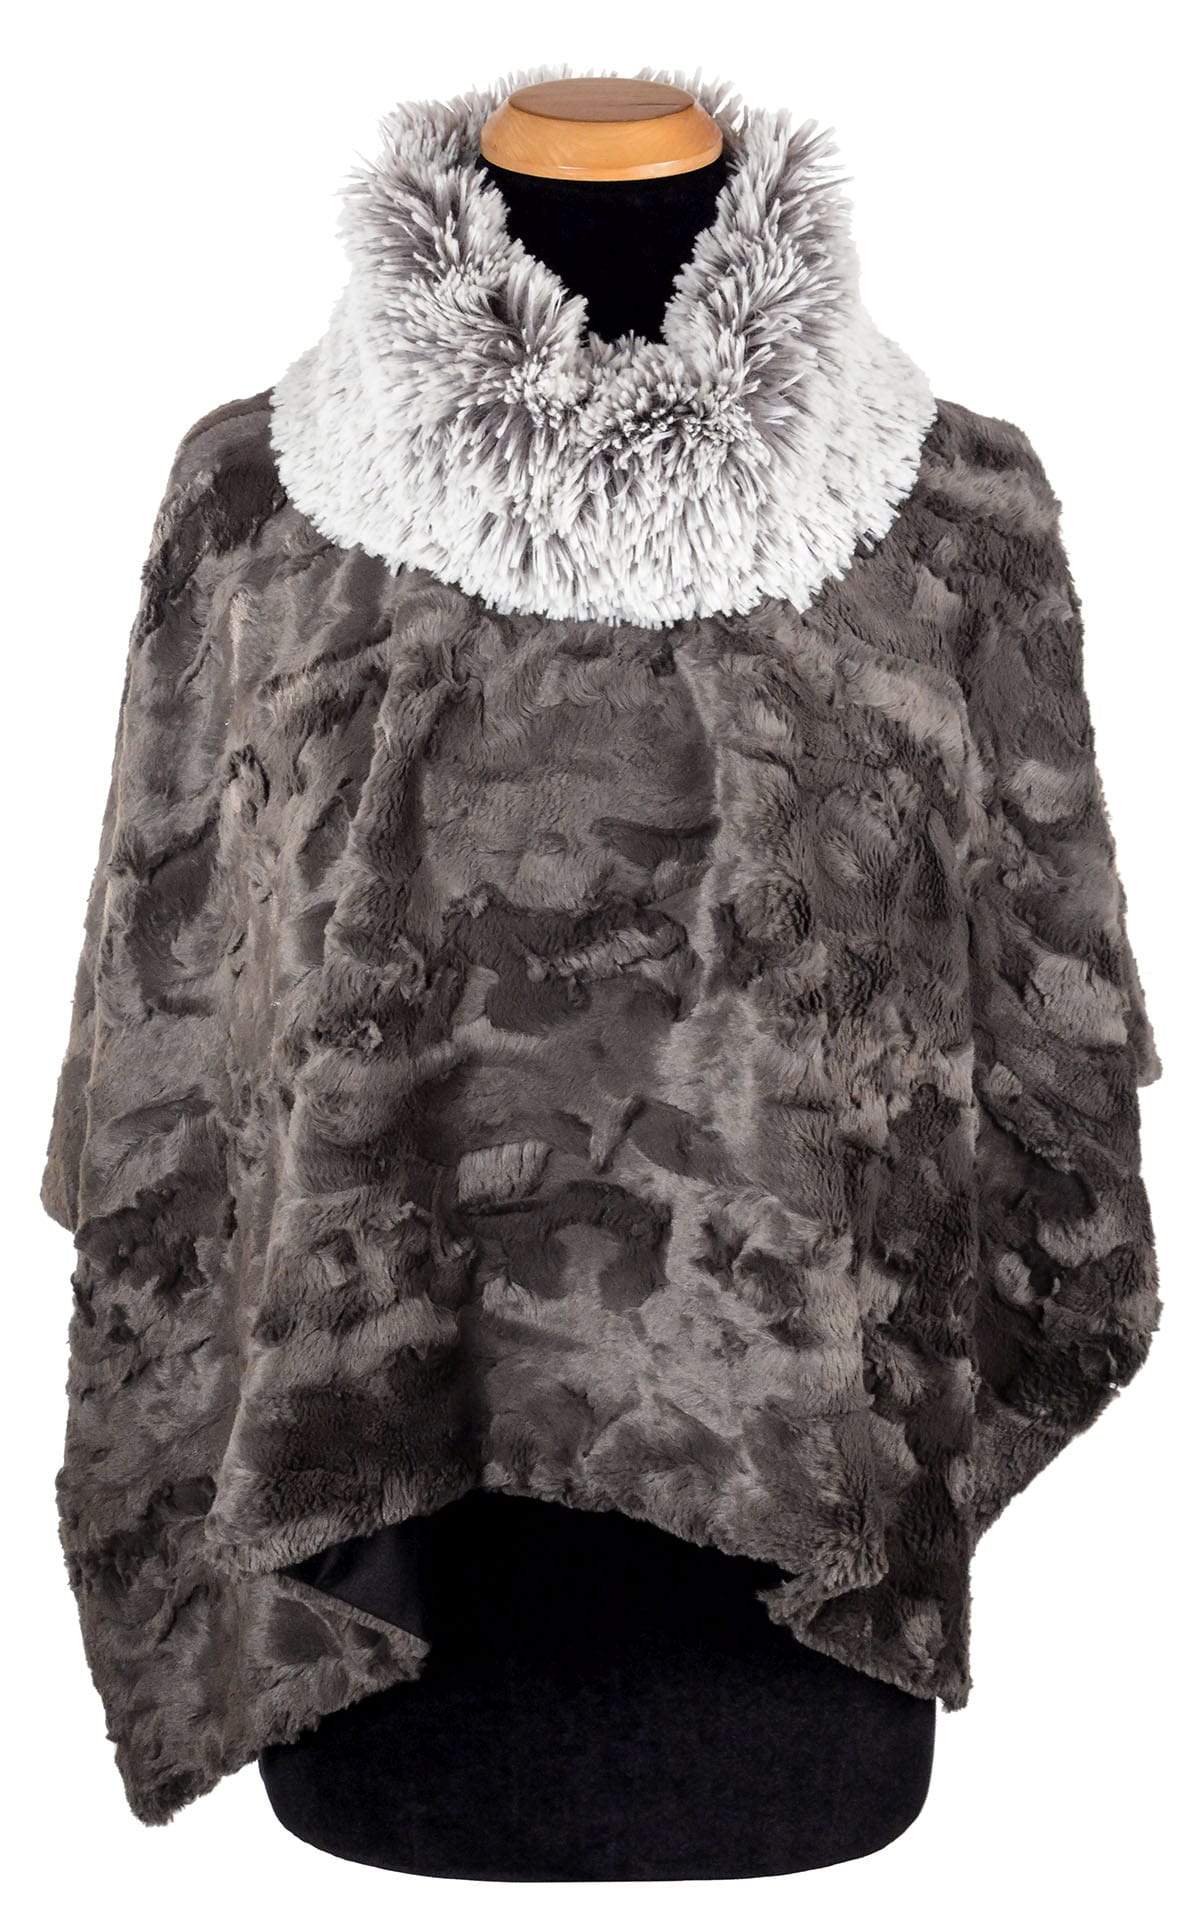 ritme Verbonden licht Poncho - Cuddly Faux Fur in Gray with Fox Collar - Pandemonium Millinery Faux  Fur Boutique made in Seattle WA USA